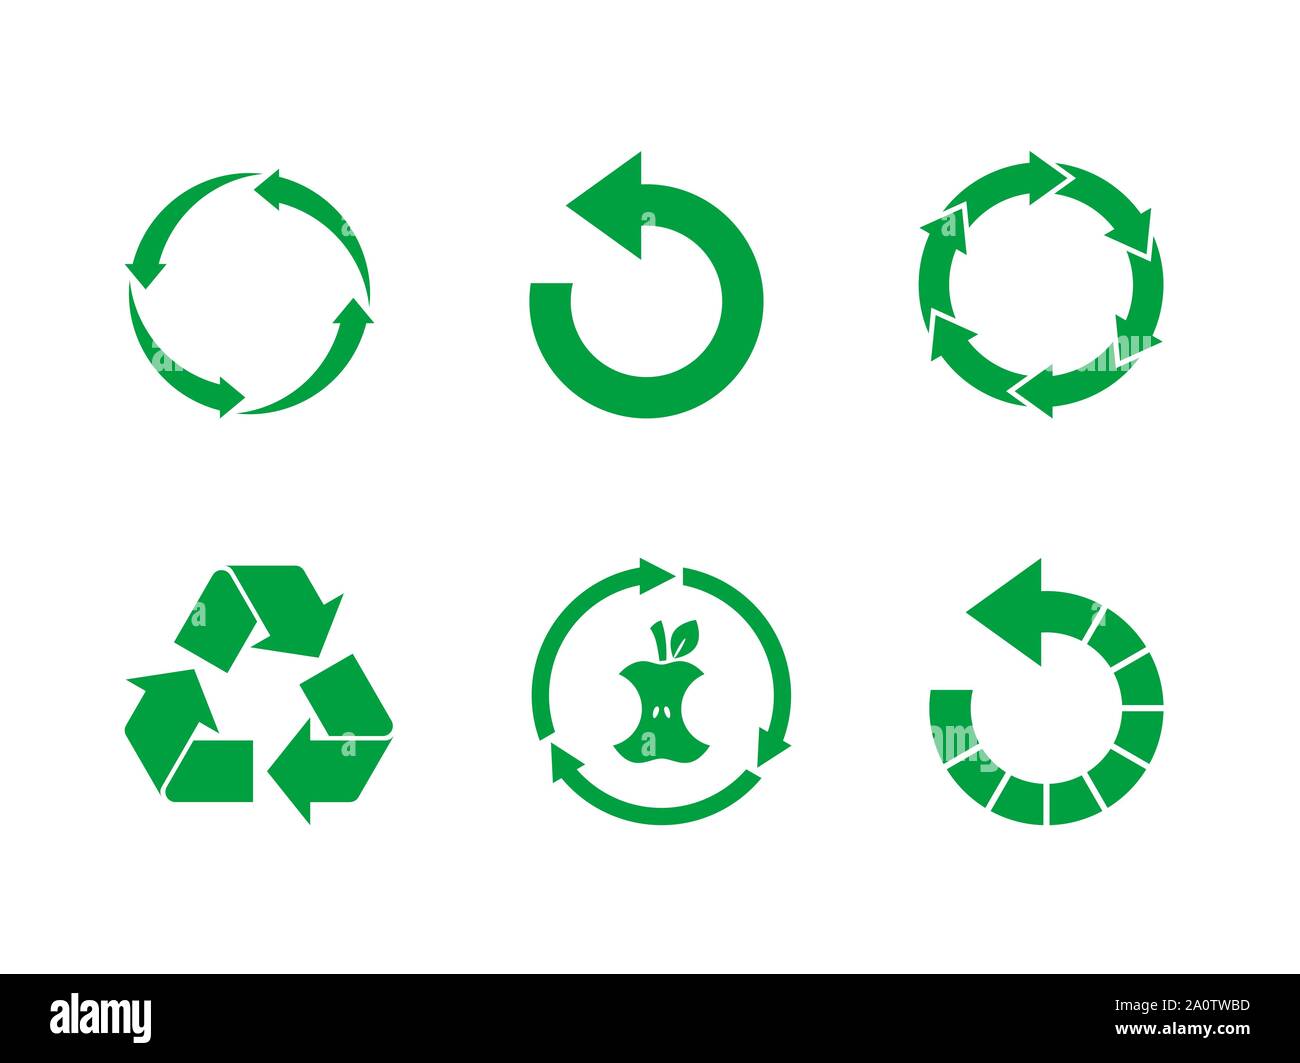 Green recycle sign set on white background. Reuse,renew,compost food waste,concept.Recycle symbol vector set.Collection of 6 different recycling icons Stock Vector